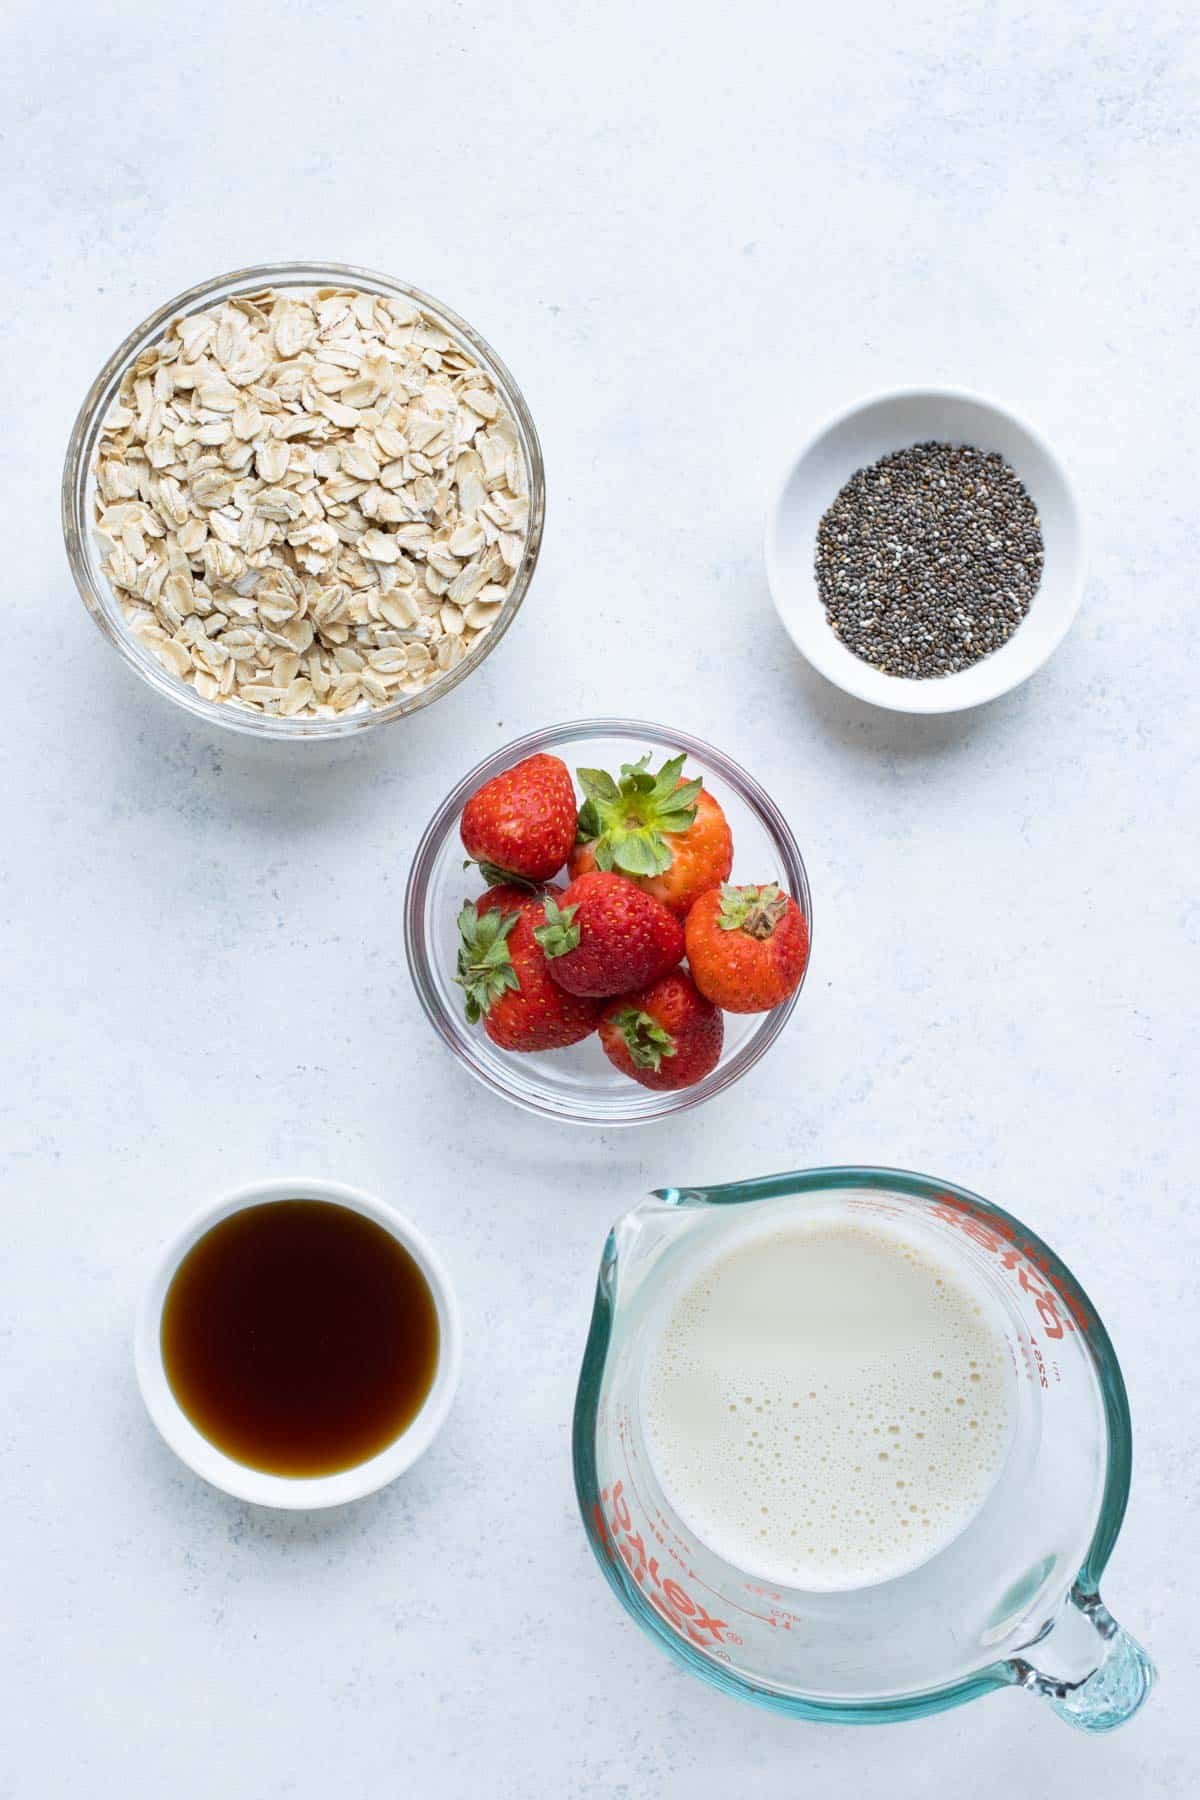 Rolled oats, strawberries, sweetener, milk, and chia seeds are the basic ingredients.